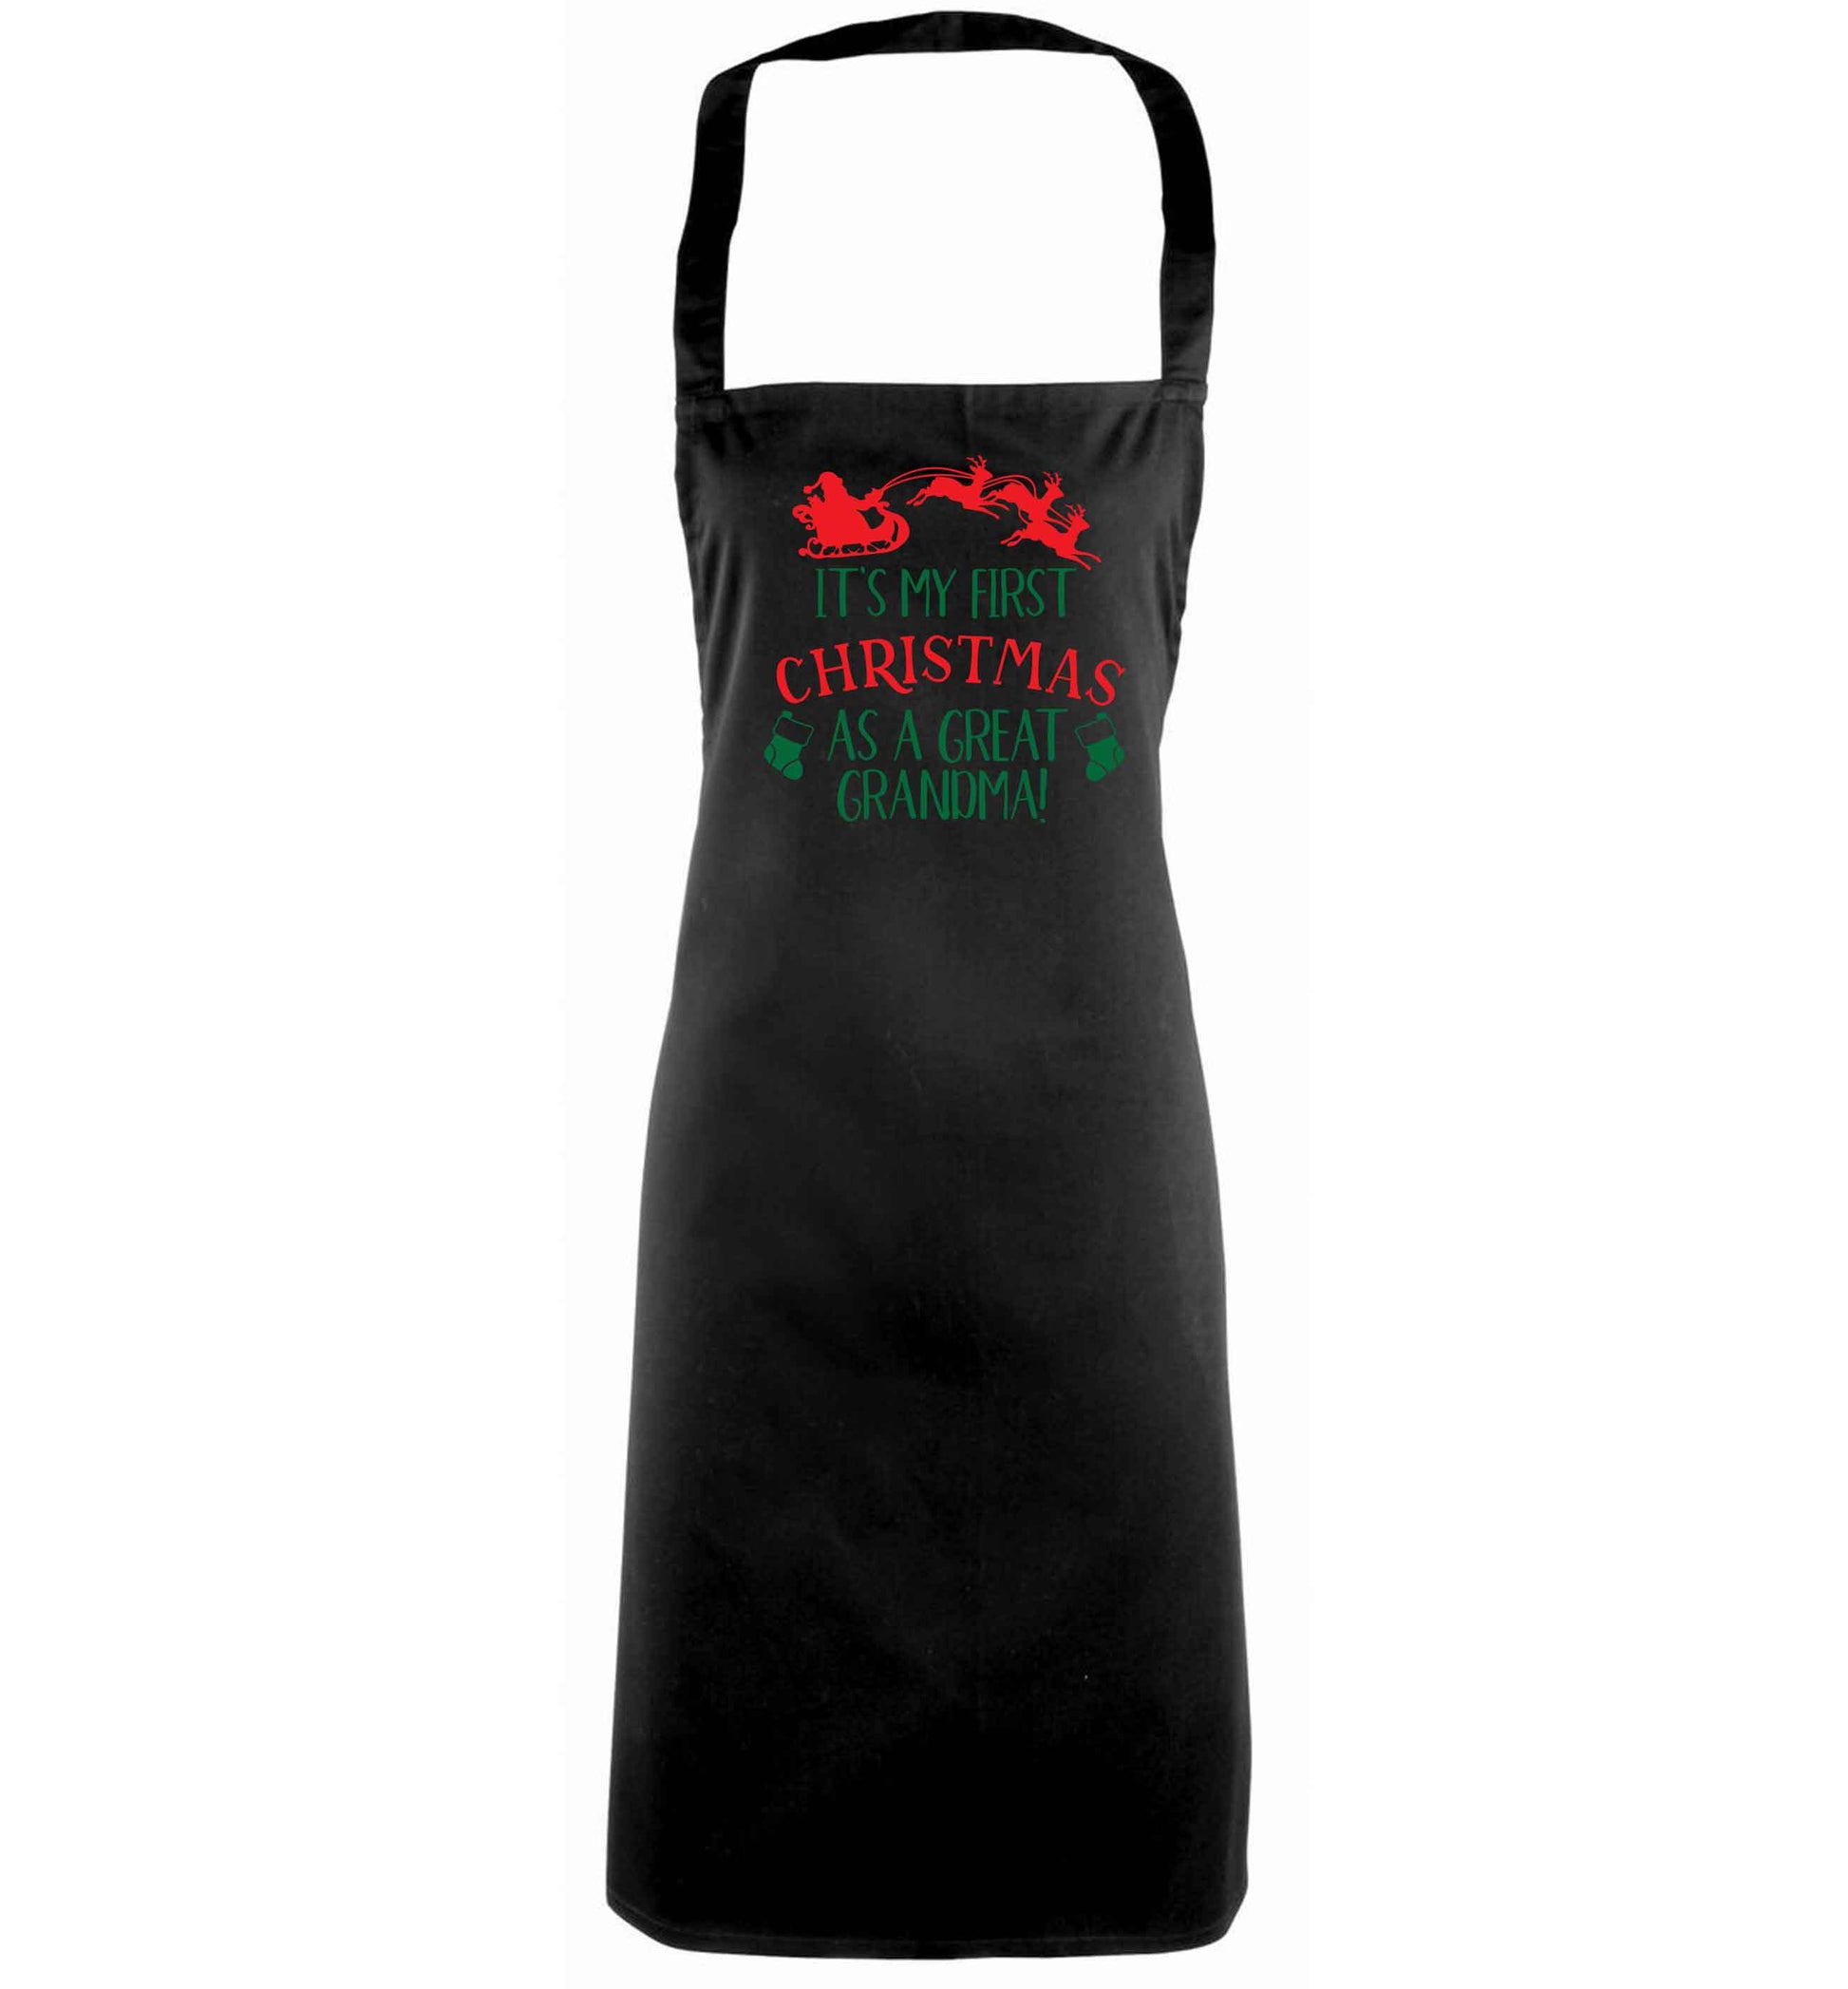 It's my first Christmas as a great grandma! black apron